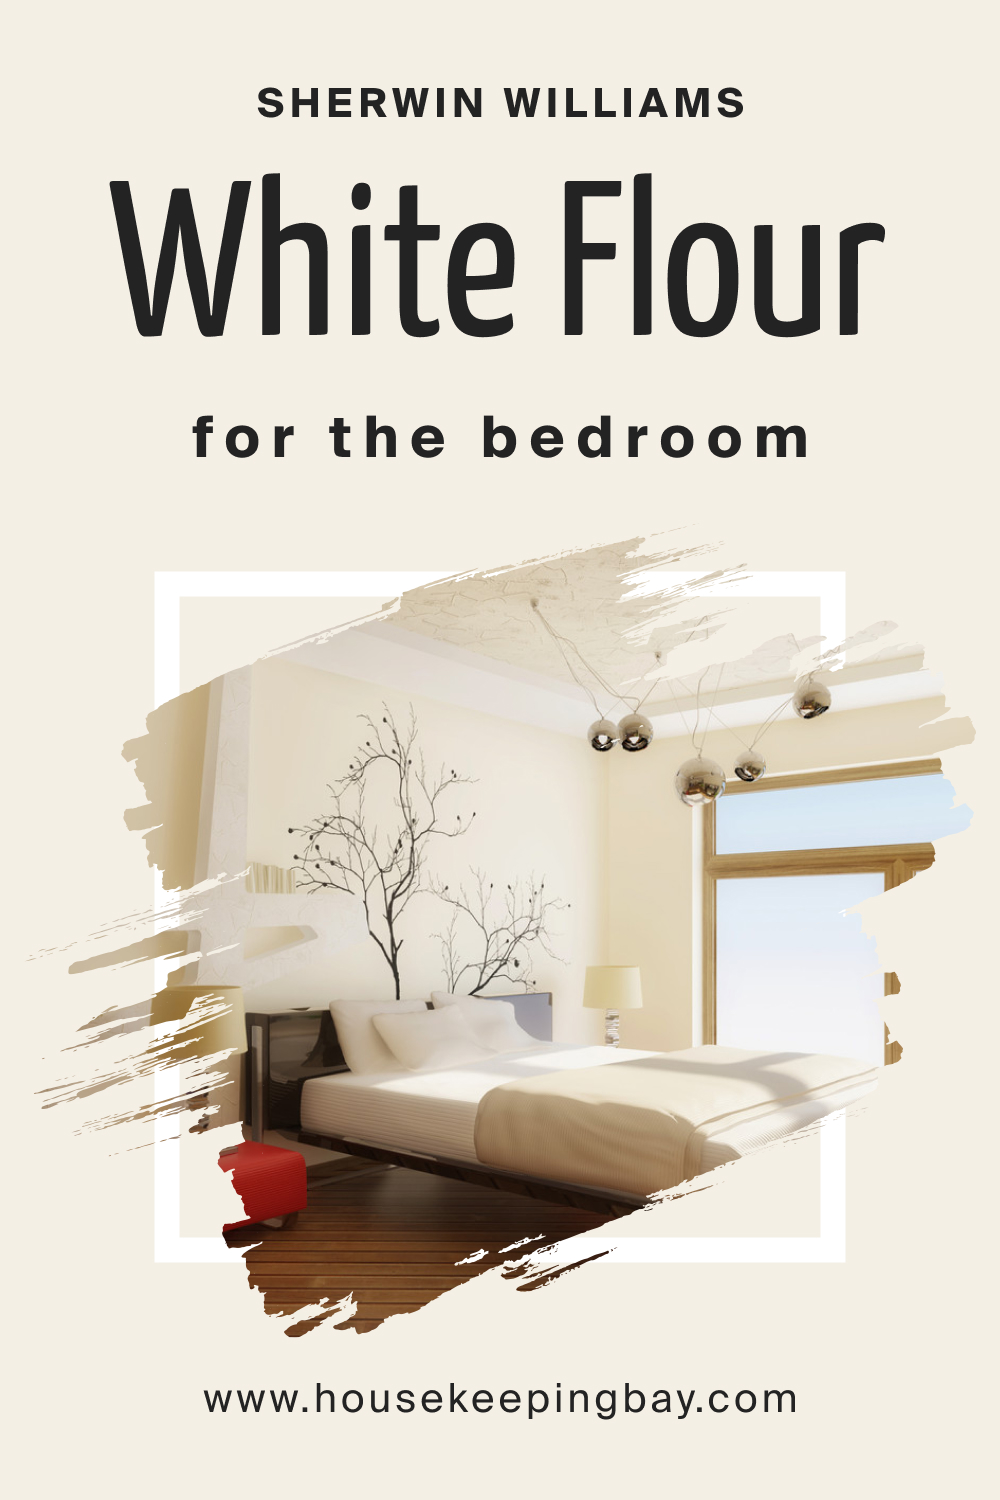 Sherwin Williams. SW White Flour For the bedroom